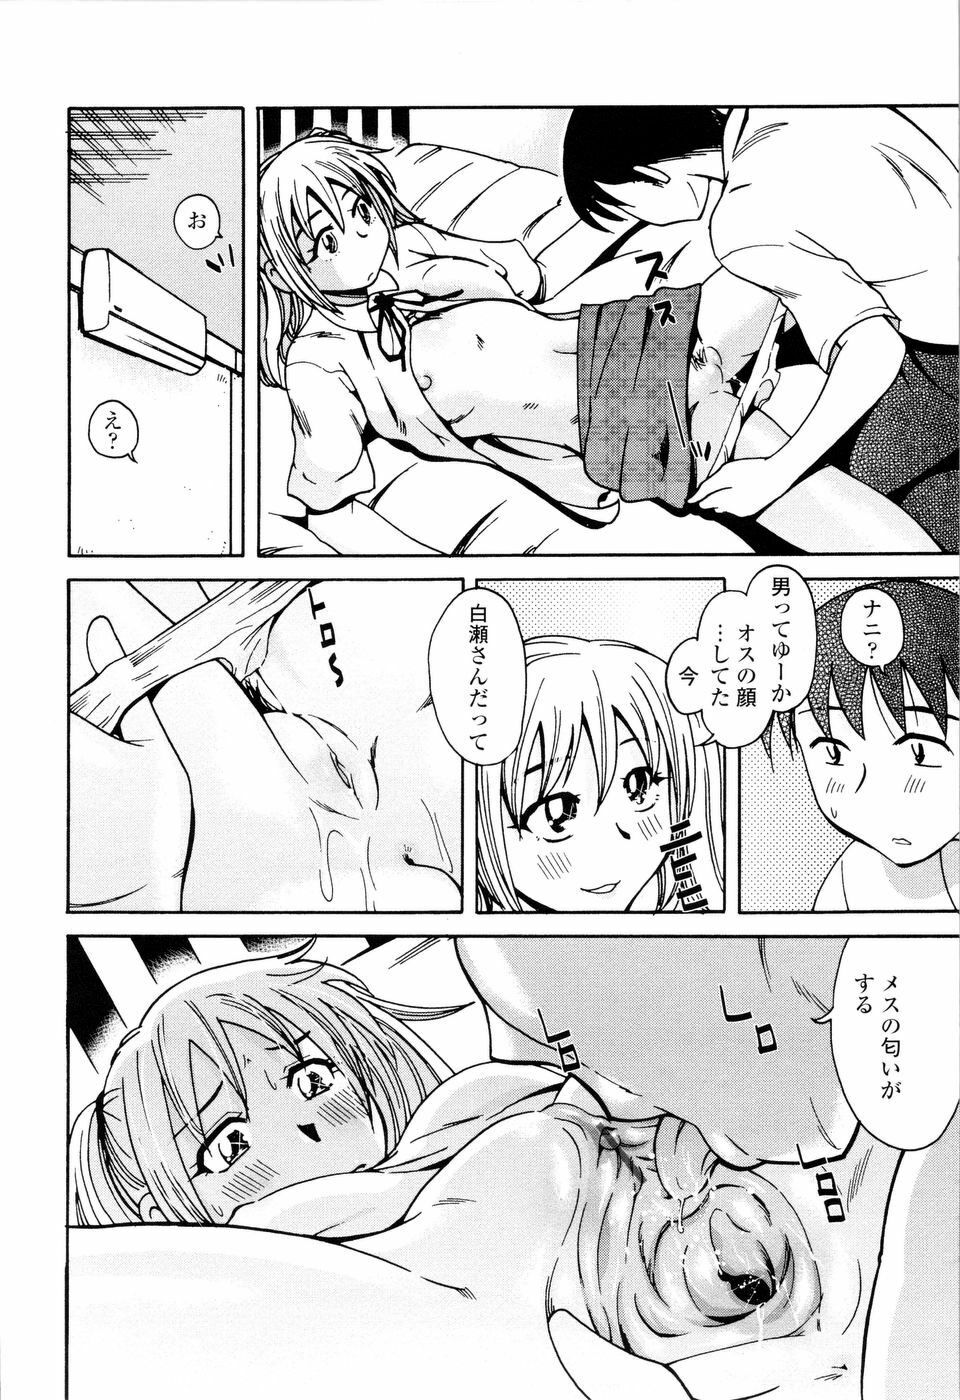 [Ono Kenuji] Love Dere - It is crazy about love. page 14 full